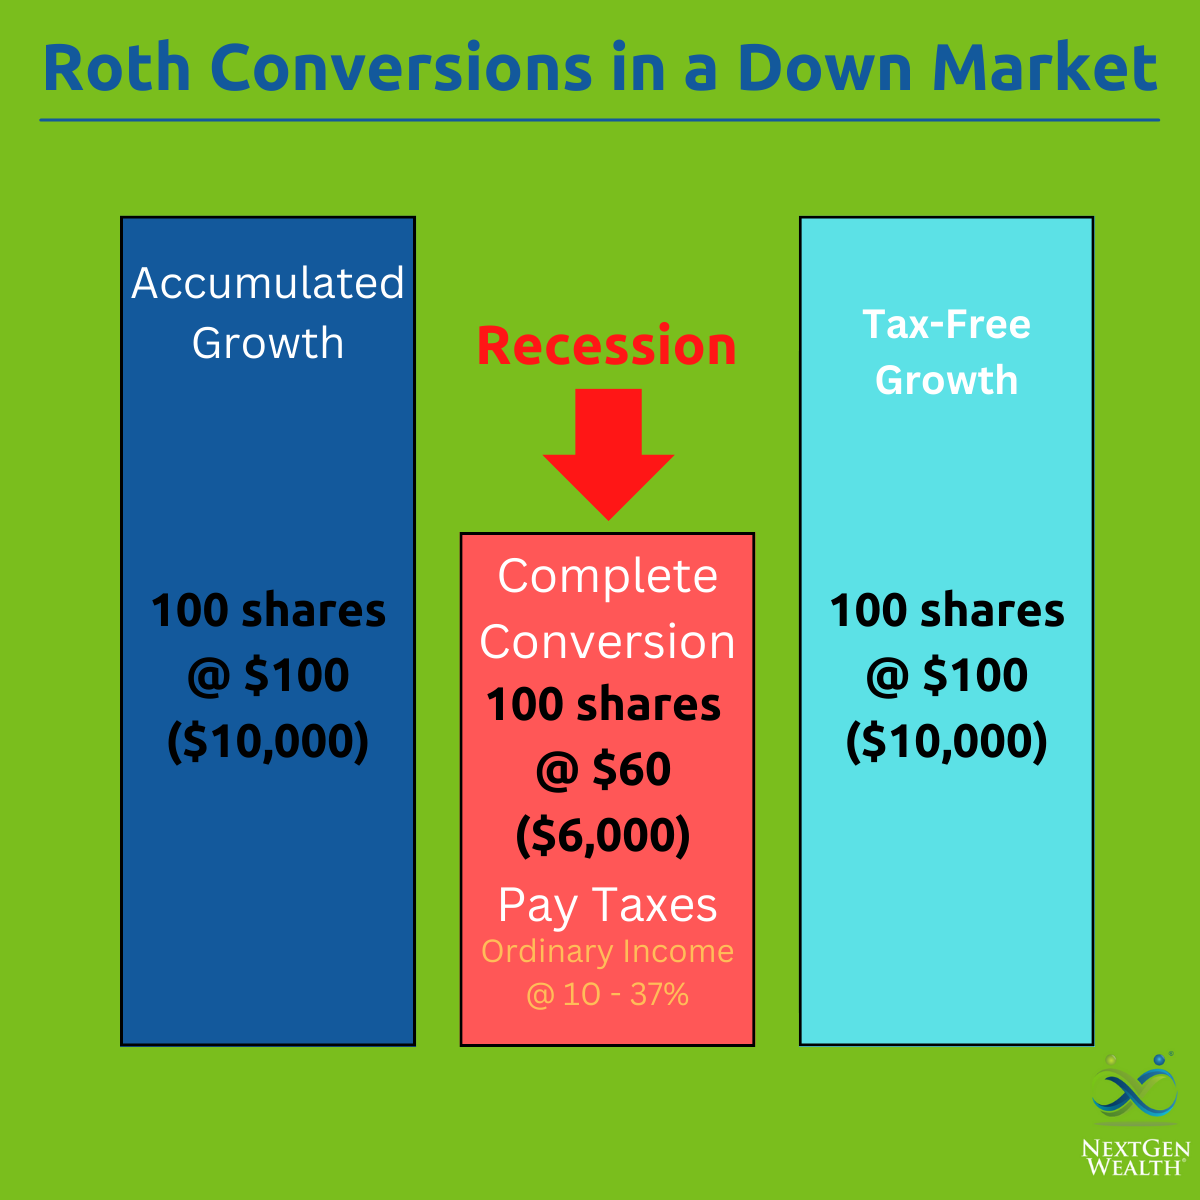 Roth Conversions in a Down Market